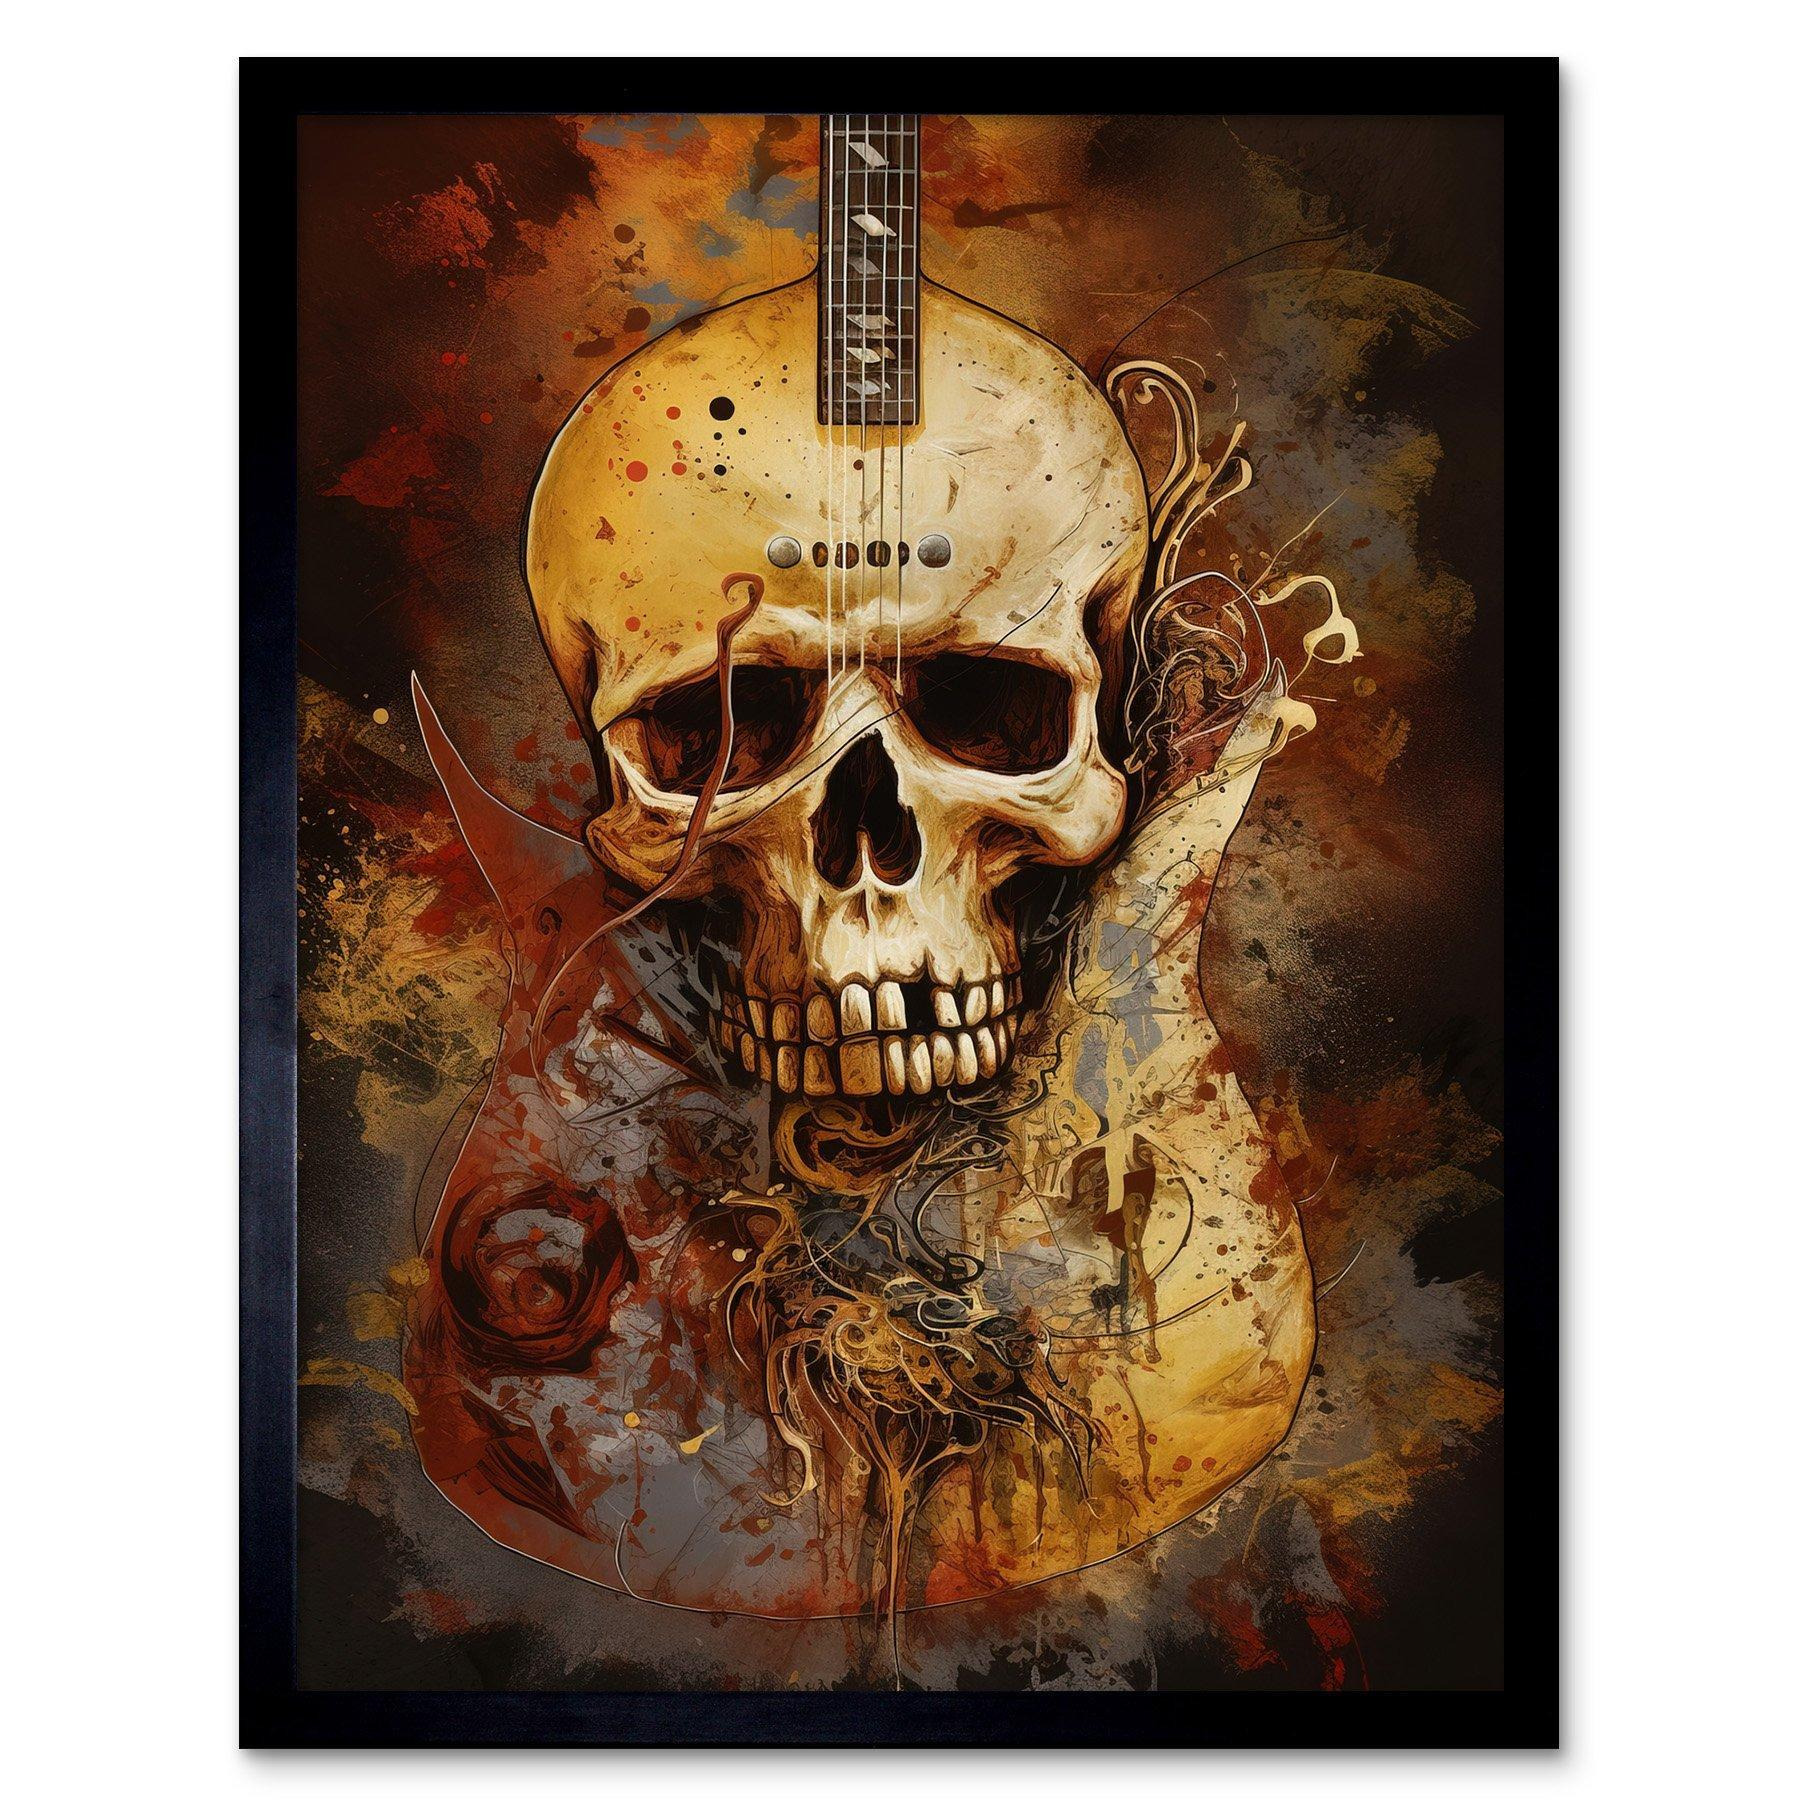 Skull Electric Guitar Death Metal Music Modern Concept Art Painting Art Print Framed Poster Wall Decor 12x16 inch - image 1